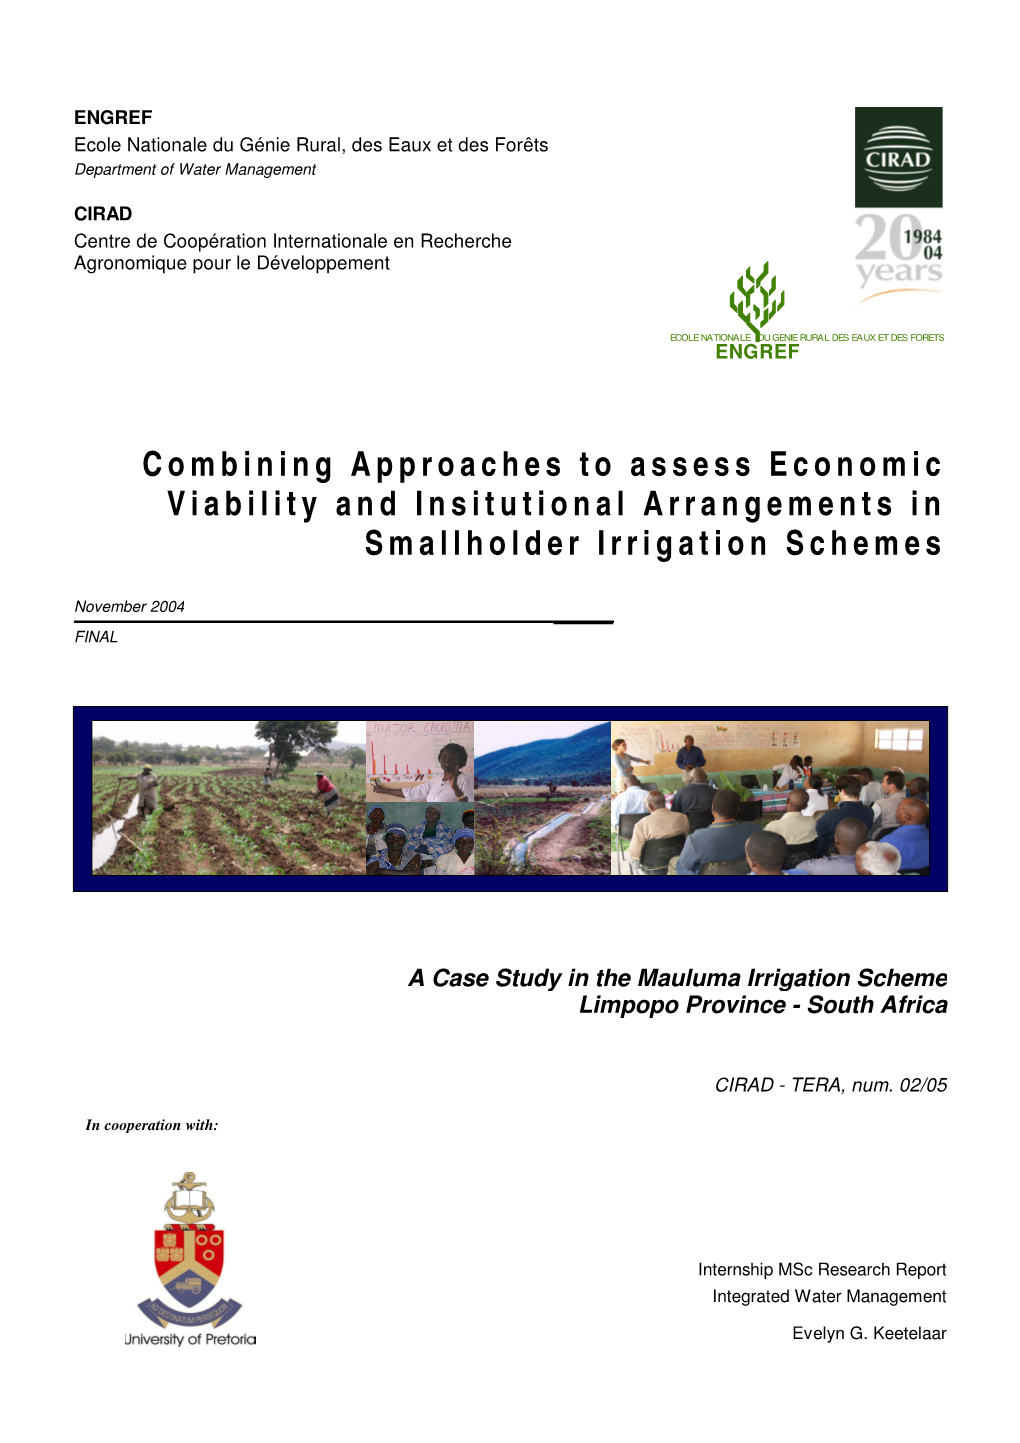 Combining Approaches to Assess Economic Viability and Insitutional Arrangements in Smallholder Irrigation Schemes